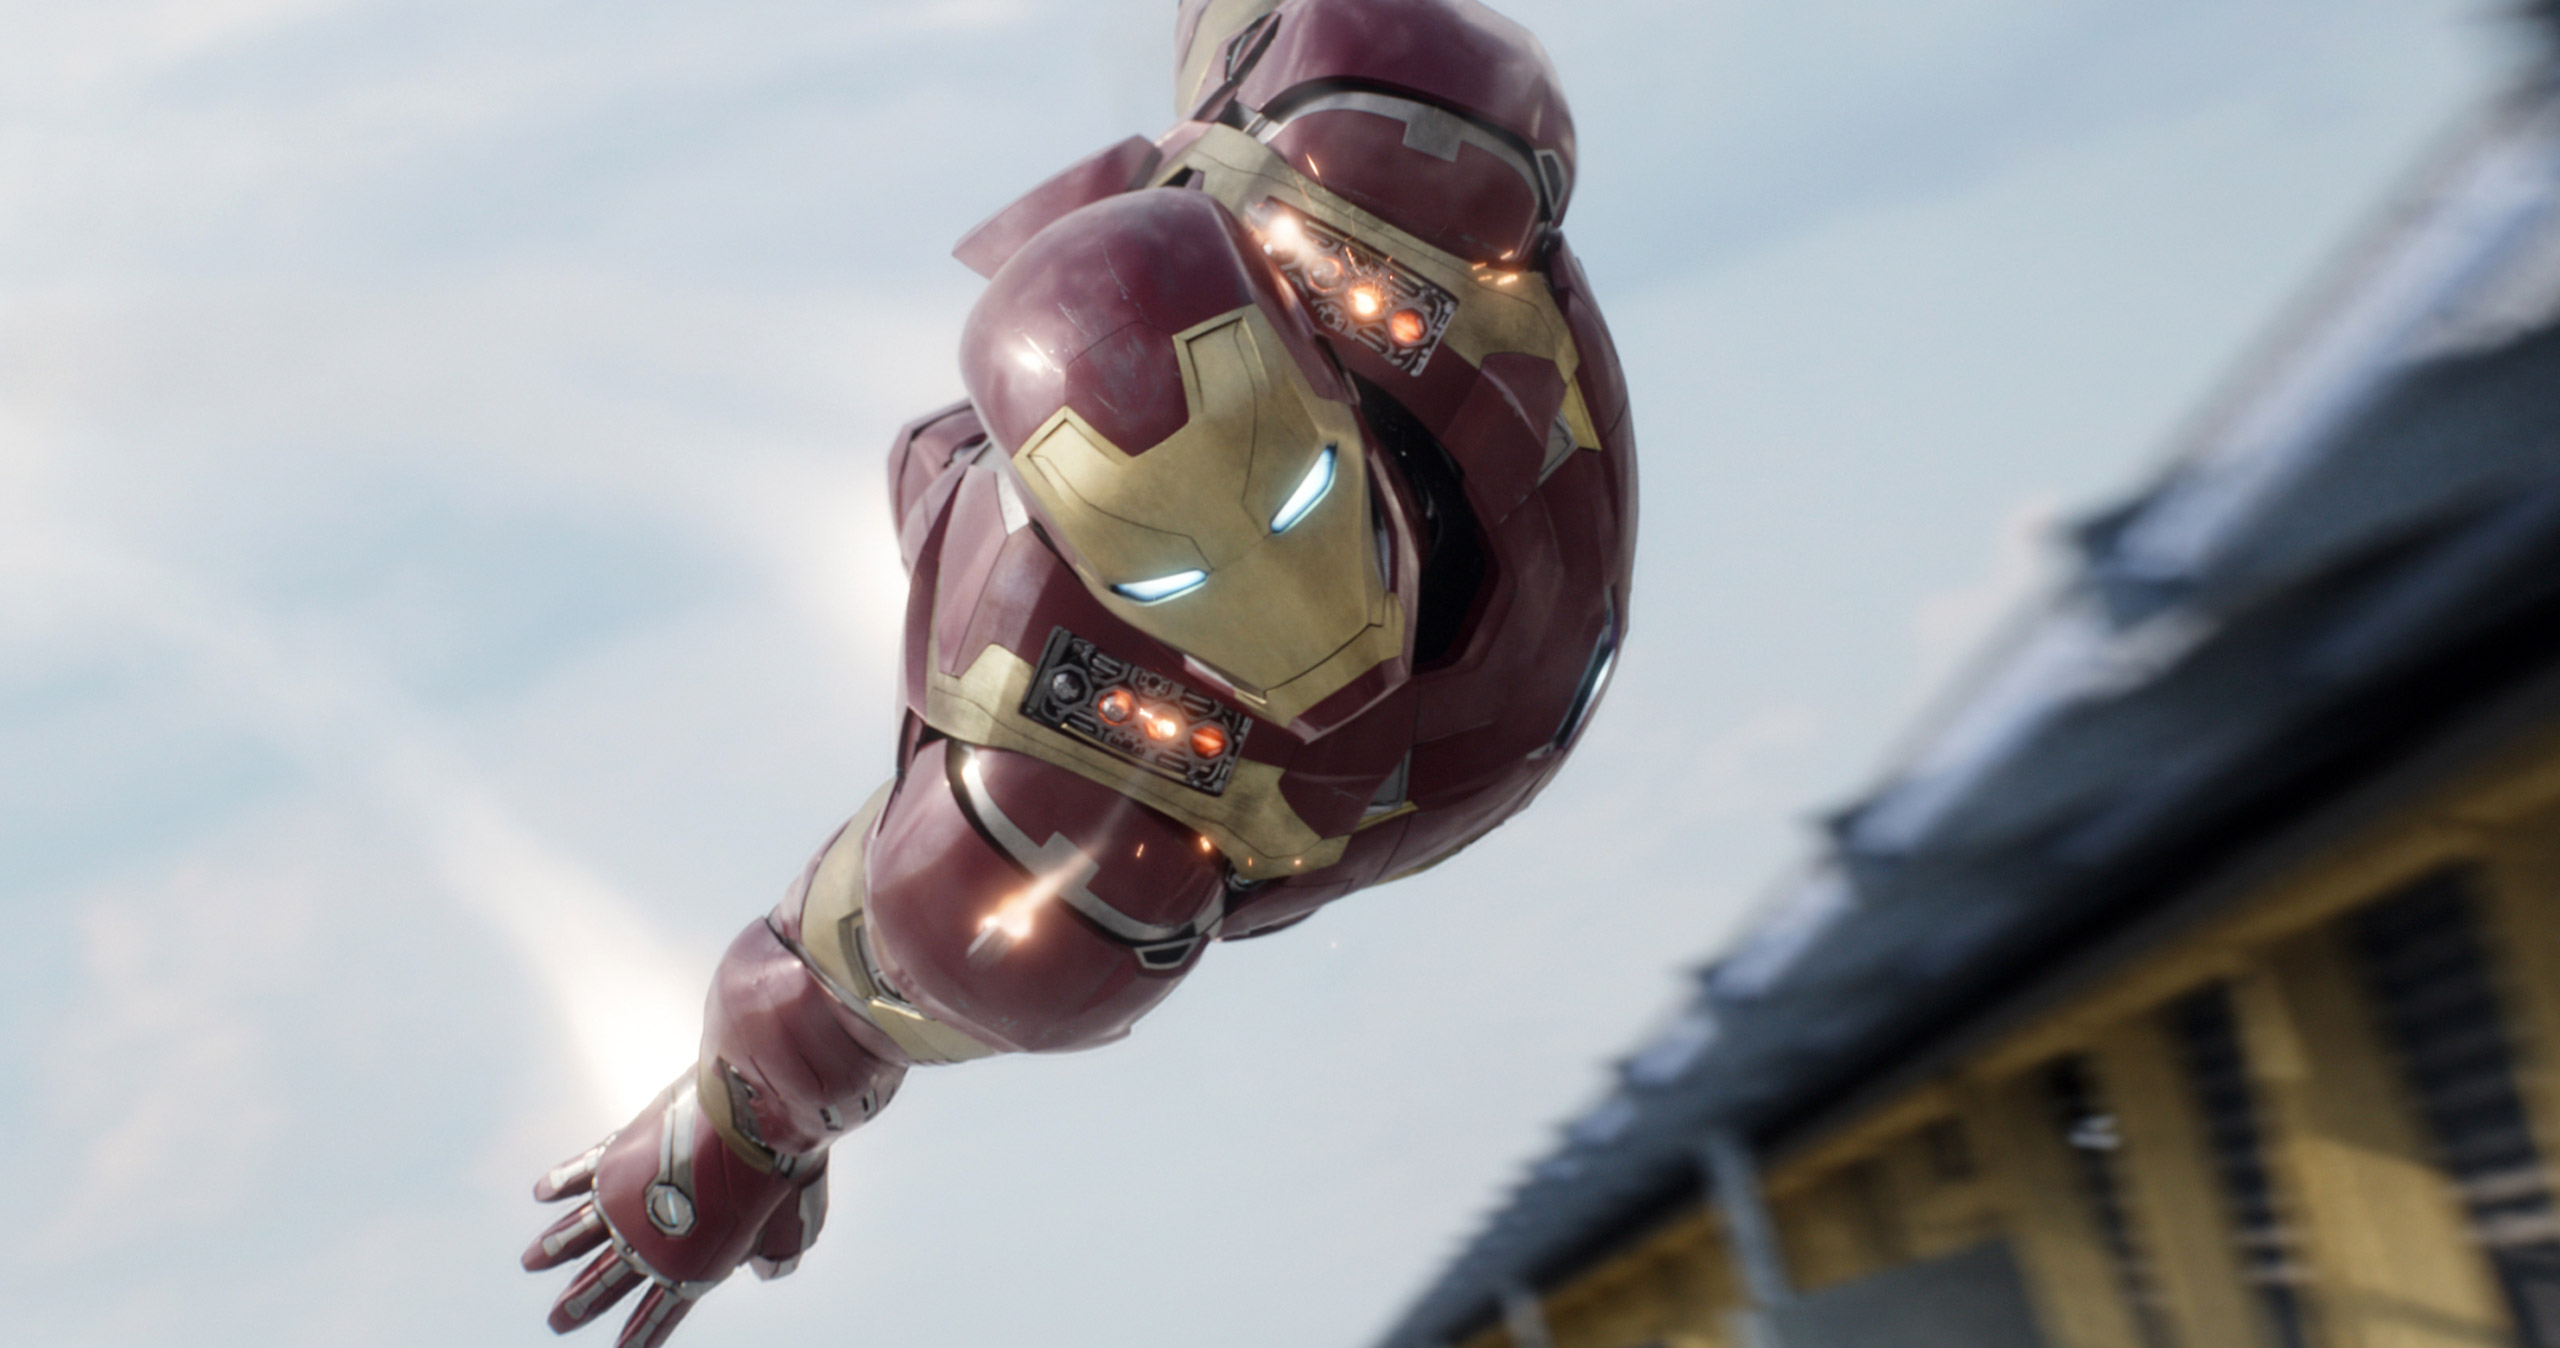 Iron Man, portrayed by Robert Downey Jr., appears in a scene from "Captain America: Civil War." (Disney-Marvel/AP)